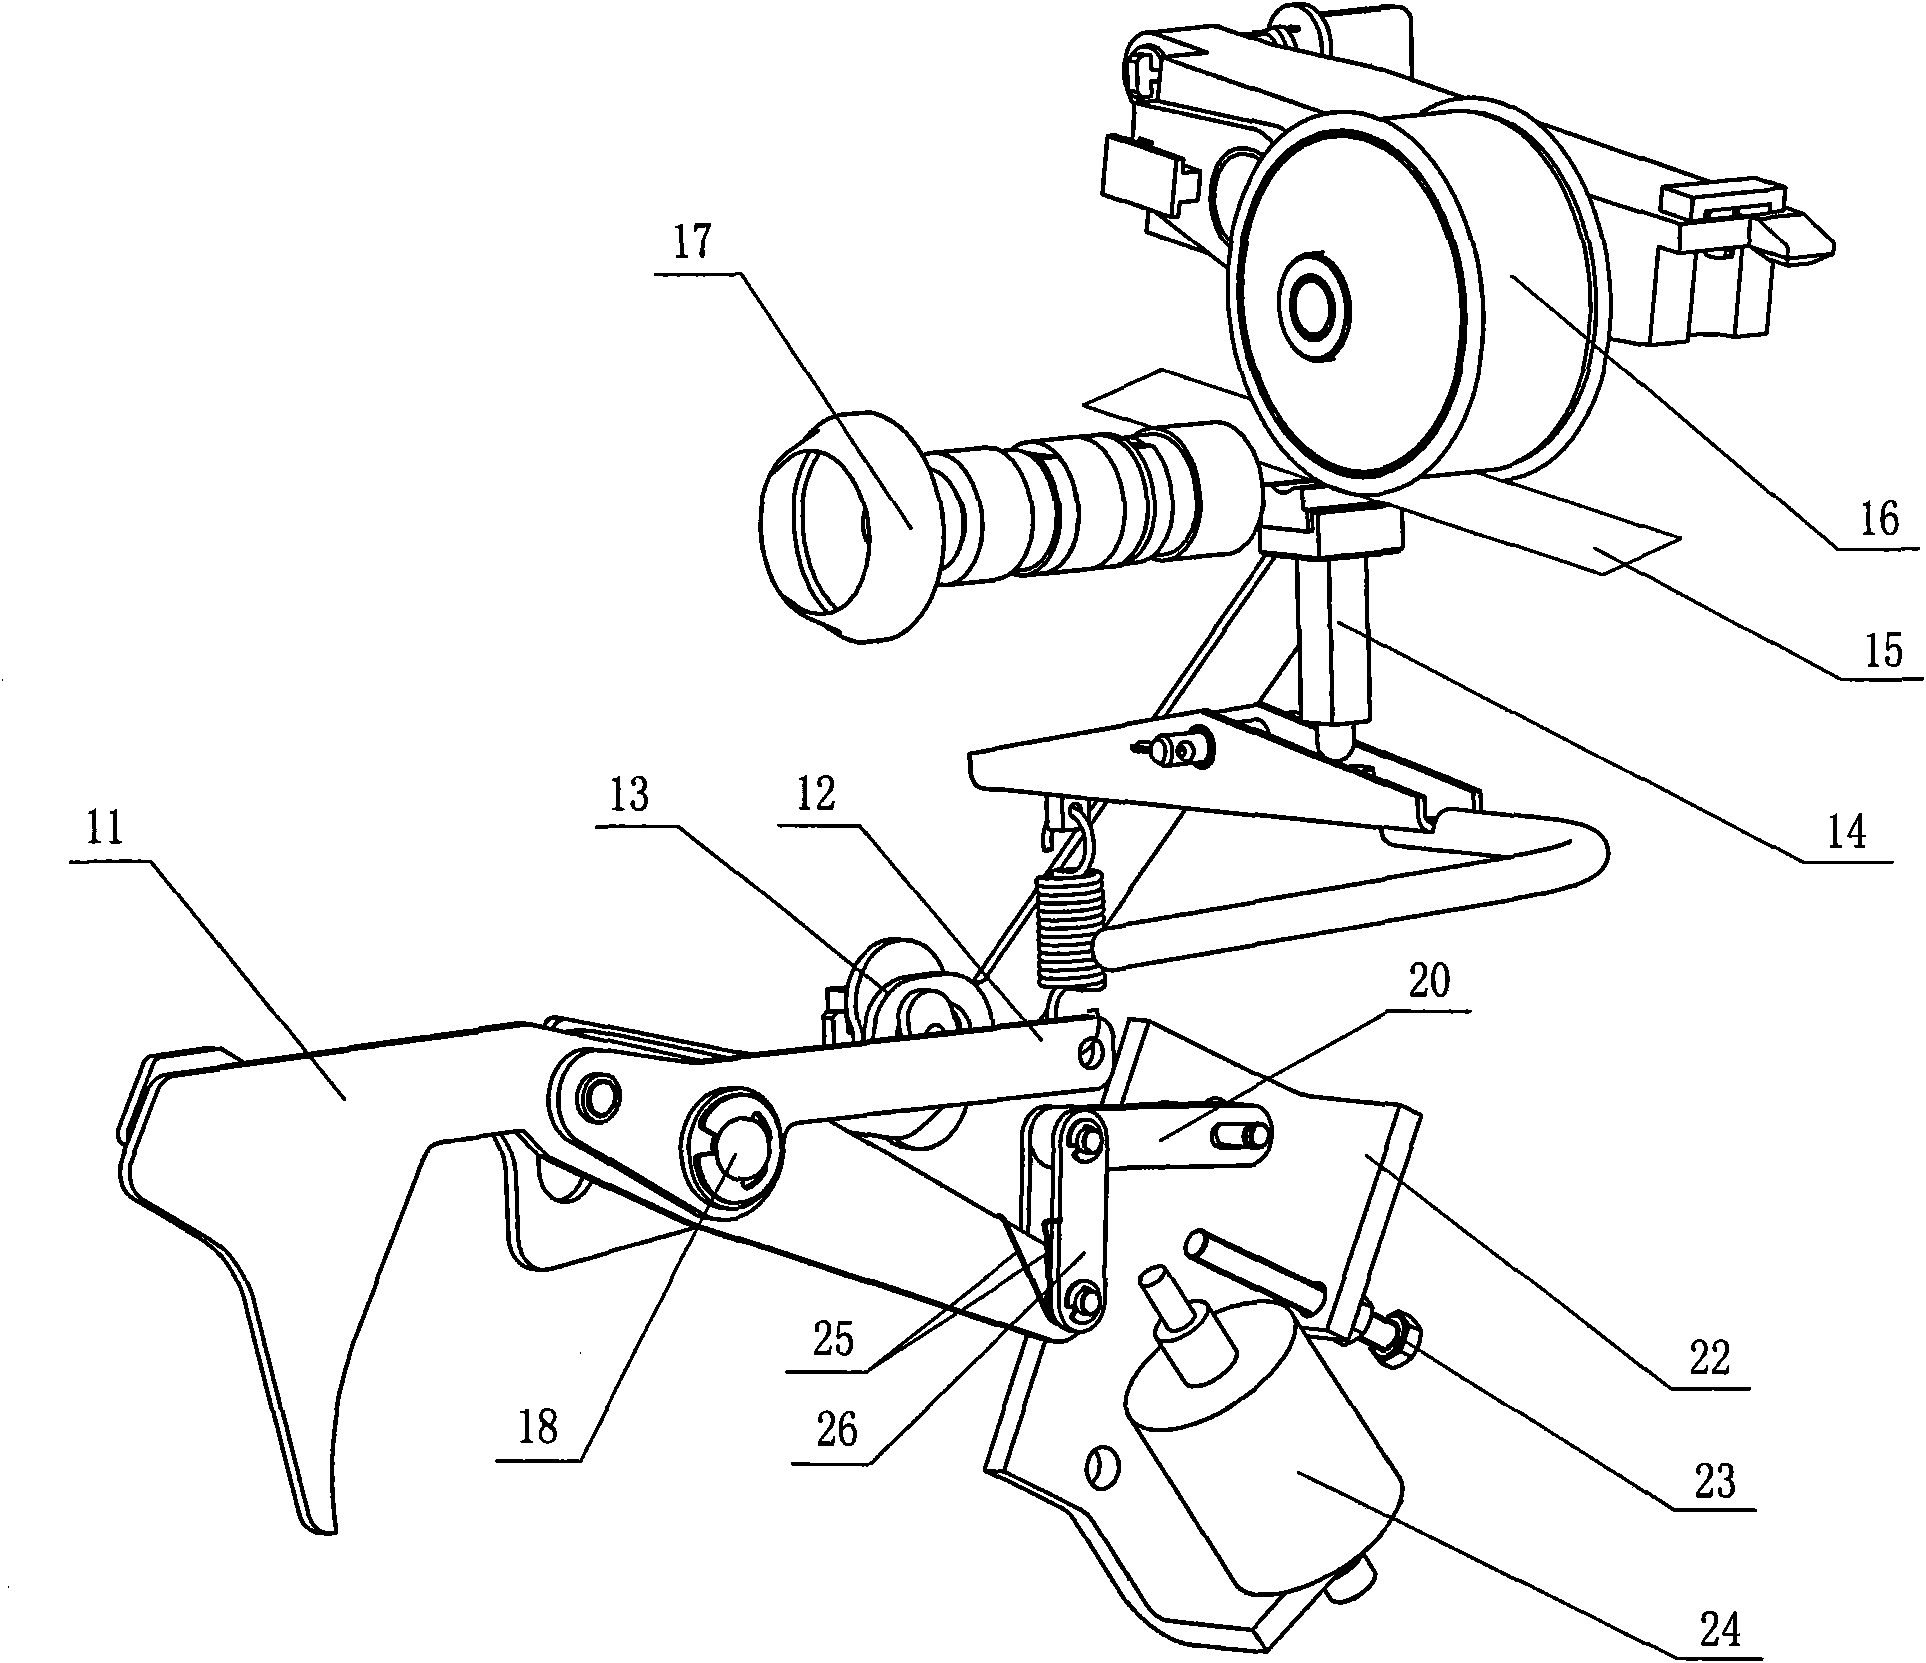 Control mechanism for delay start of spinning device rotor